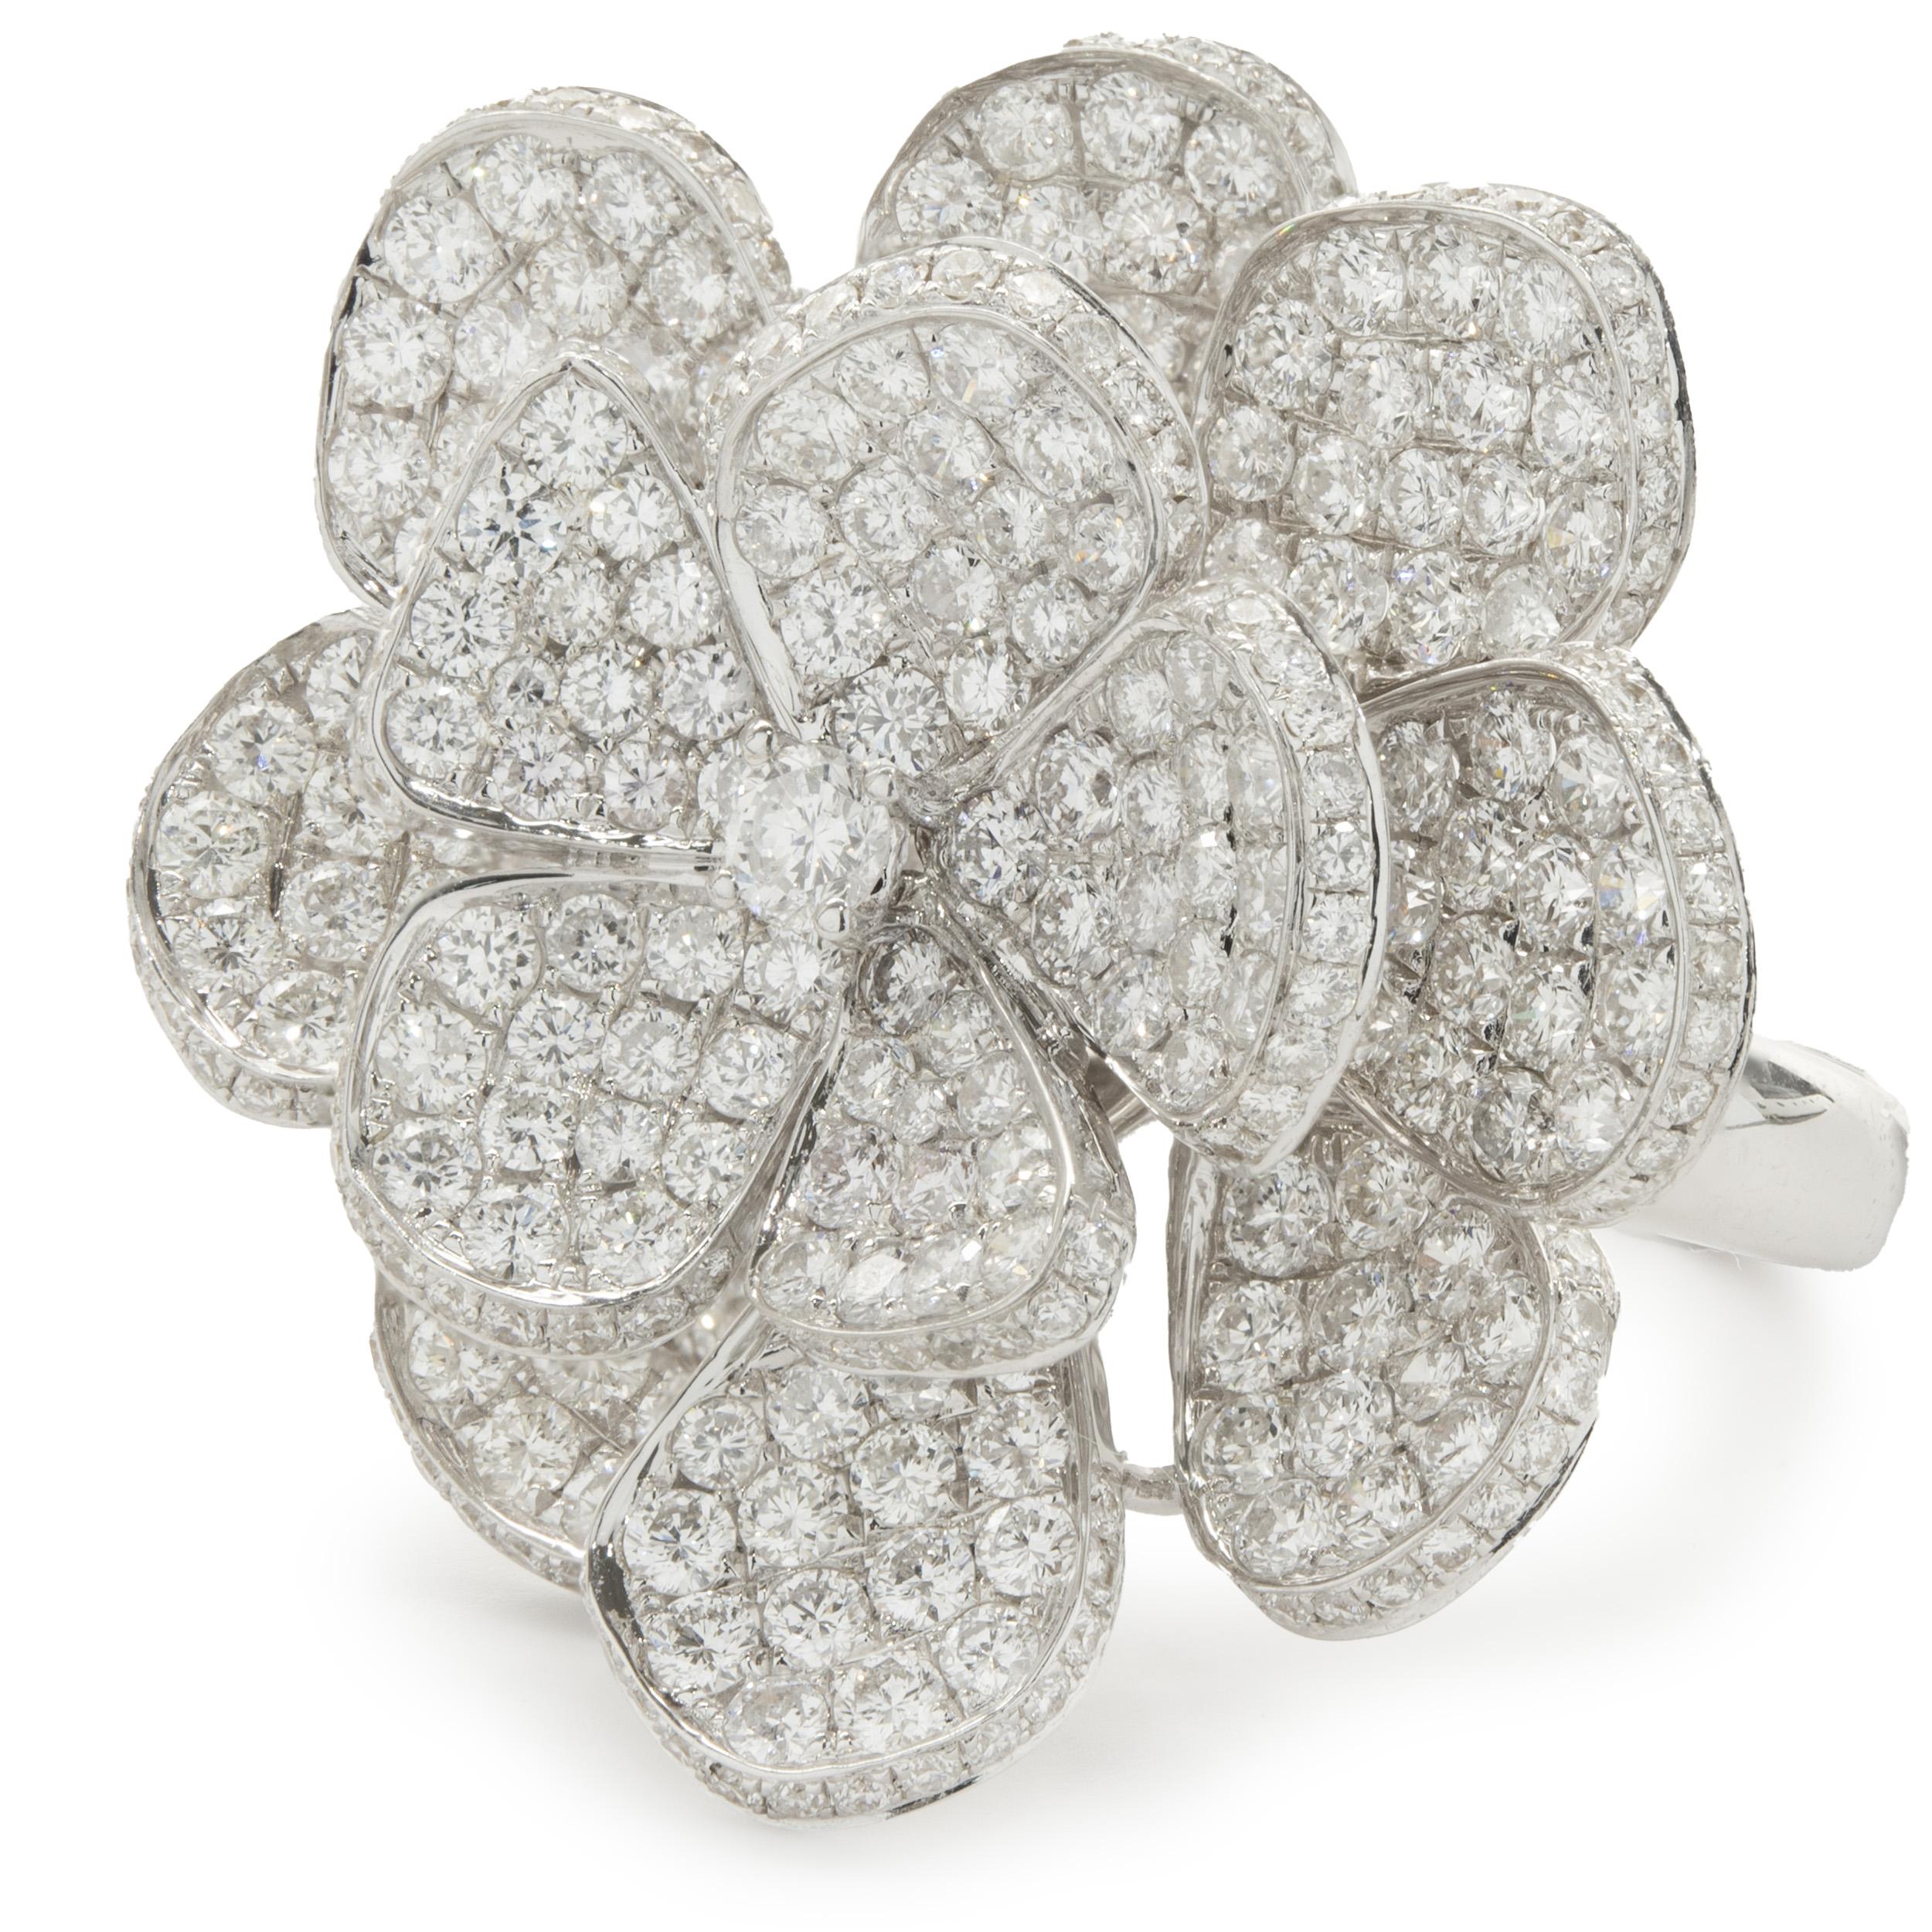 18 Karat White Gold Pave Diamond Flower Ring In Excellent Condition For Sale In Scottsdale, AZ